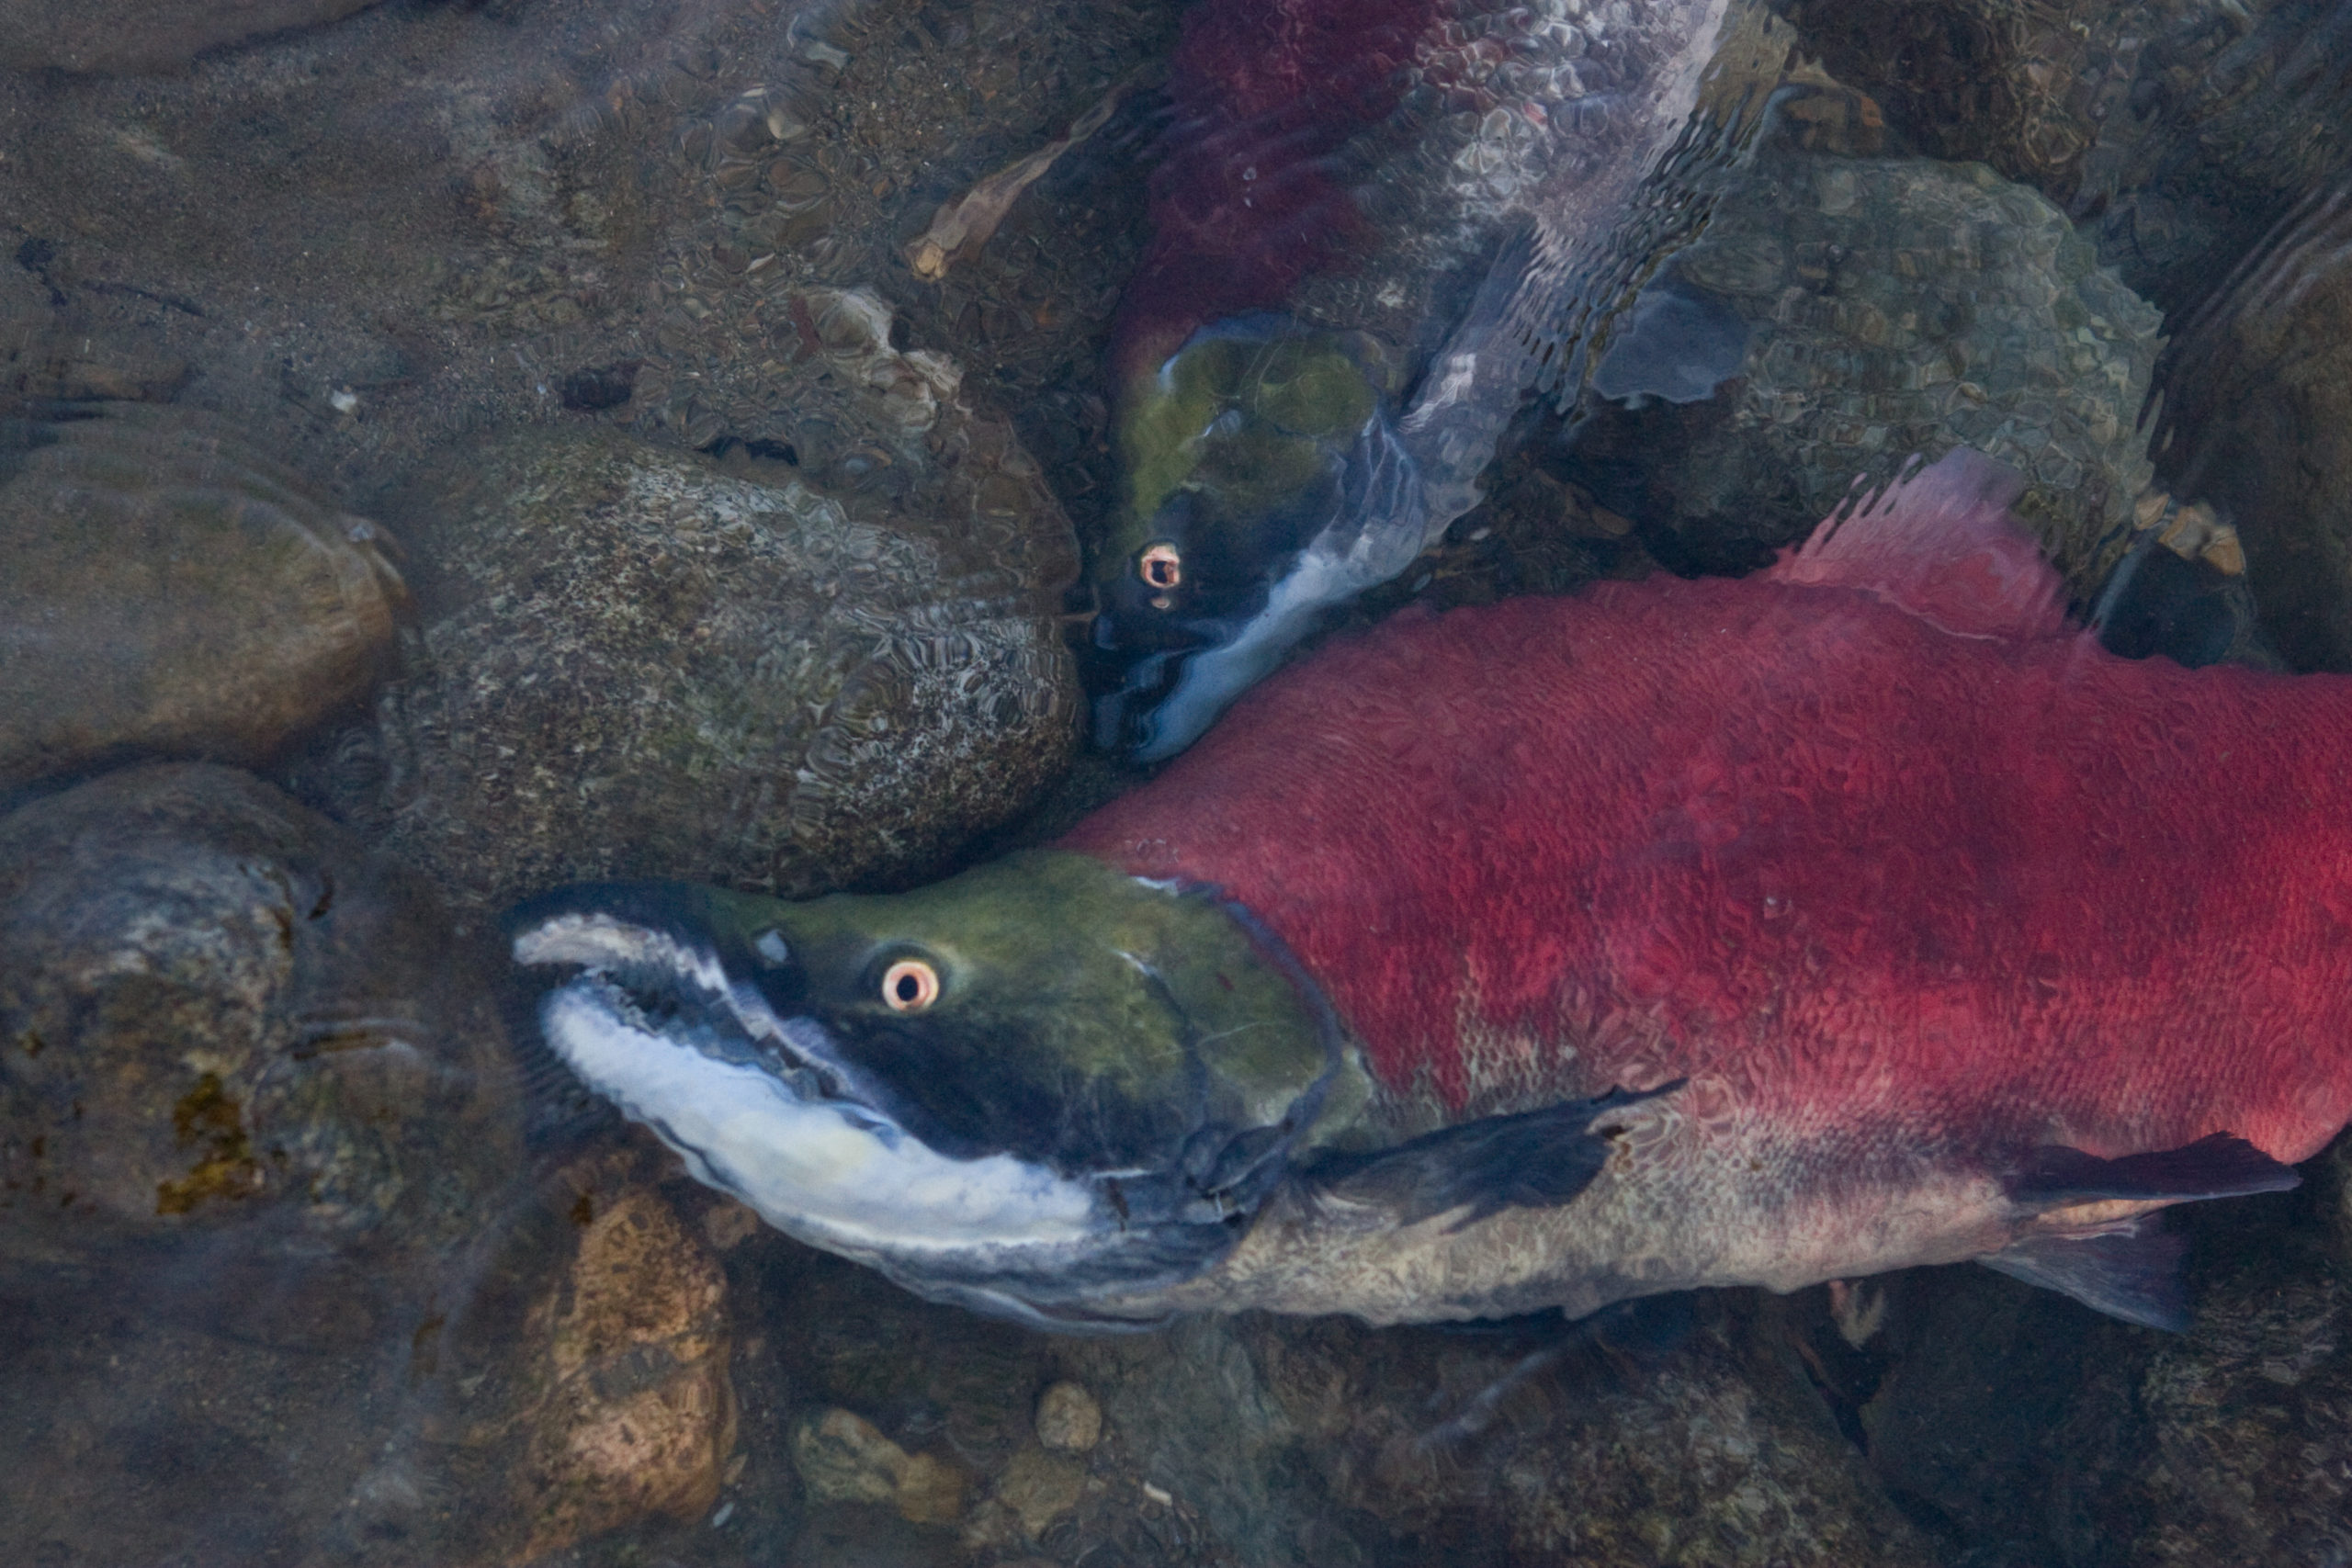 https://thenarwhal.ca/wp-content/uploads/2020/08/Sockeye-watershed-watch-scaled.jpg